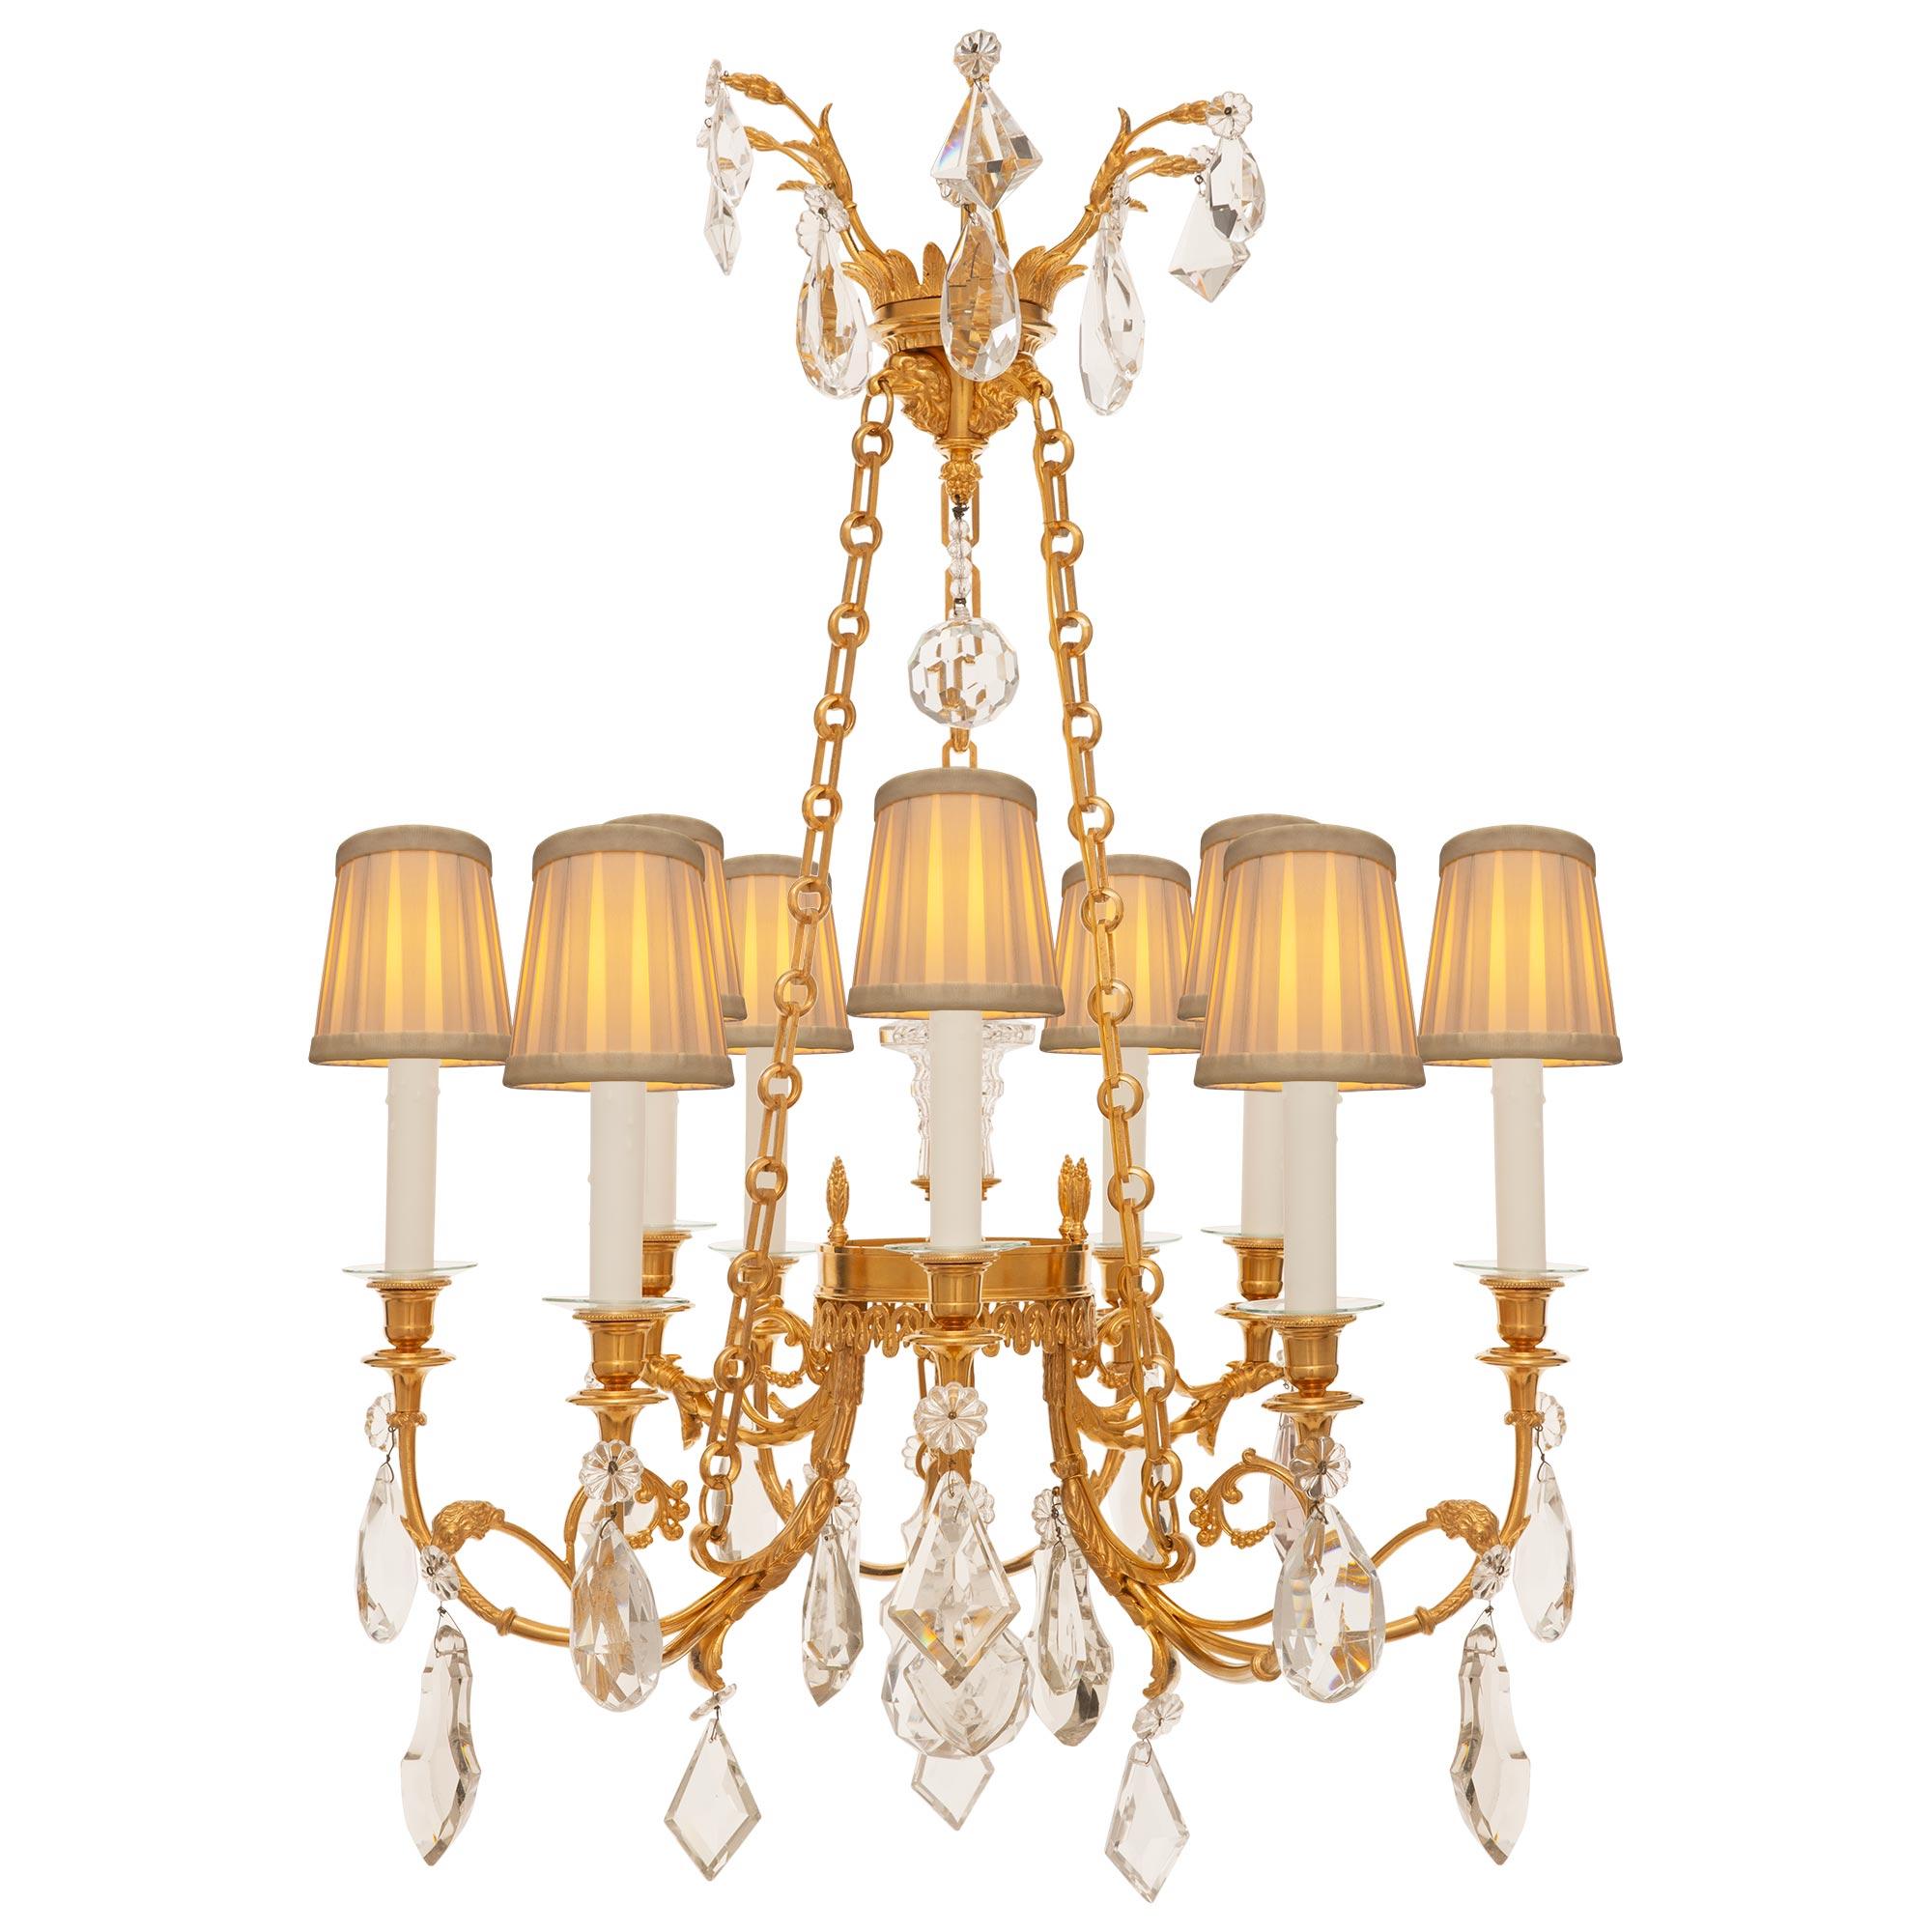 French 19th Century Belle Époque Period Ormolu And Baccarat Crystal Chandelier